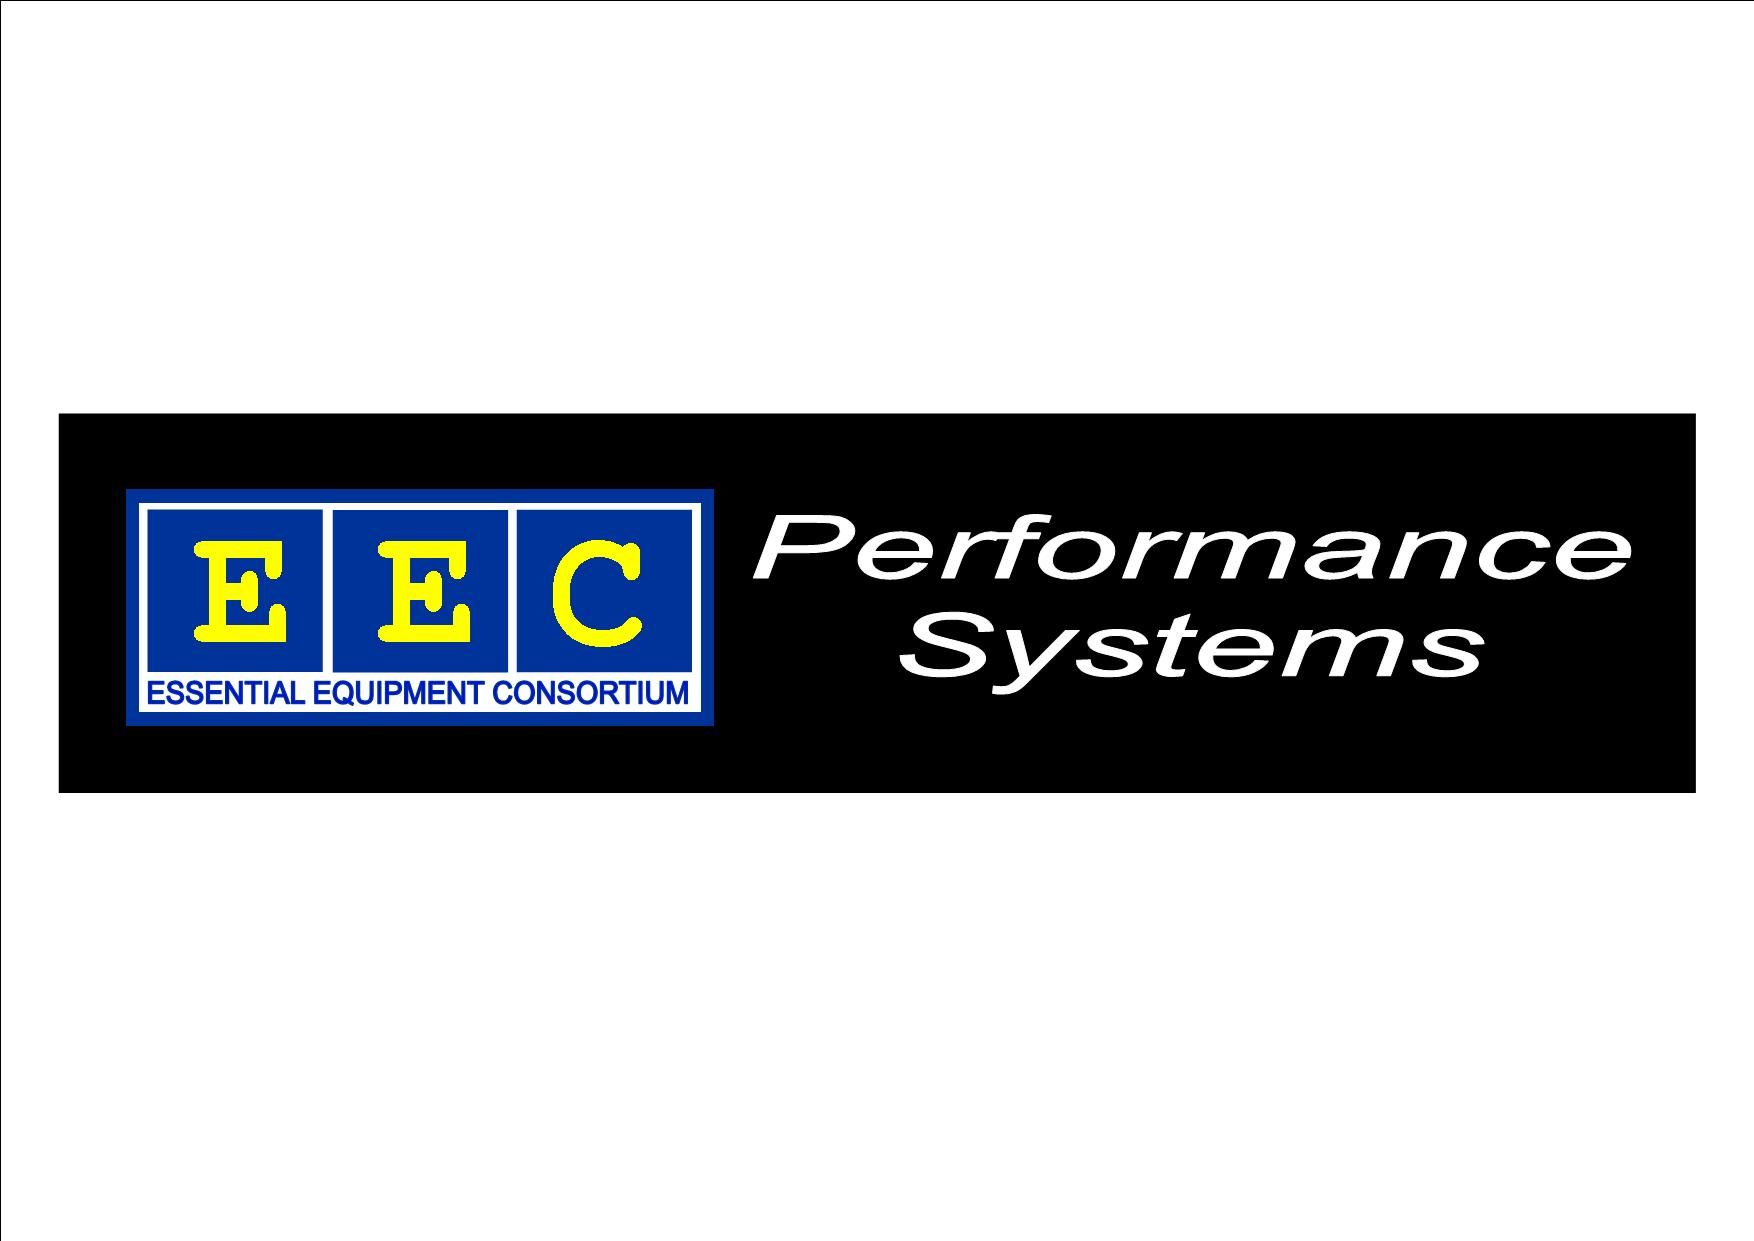 EEC Performance Systems